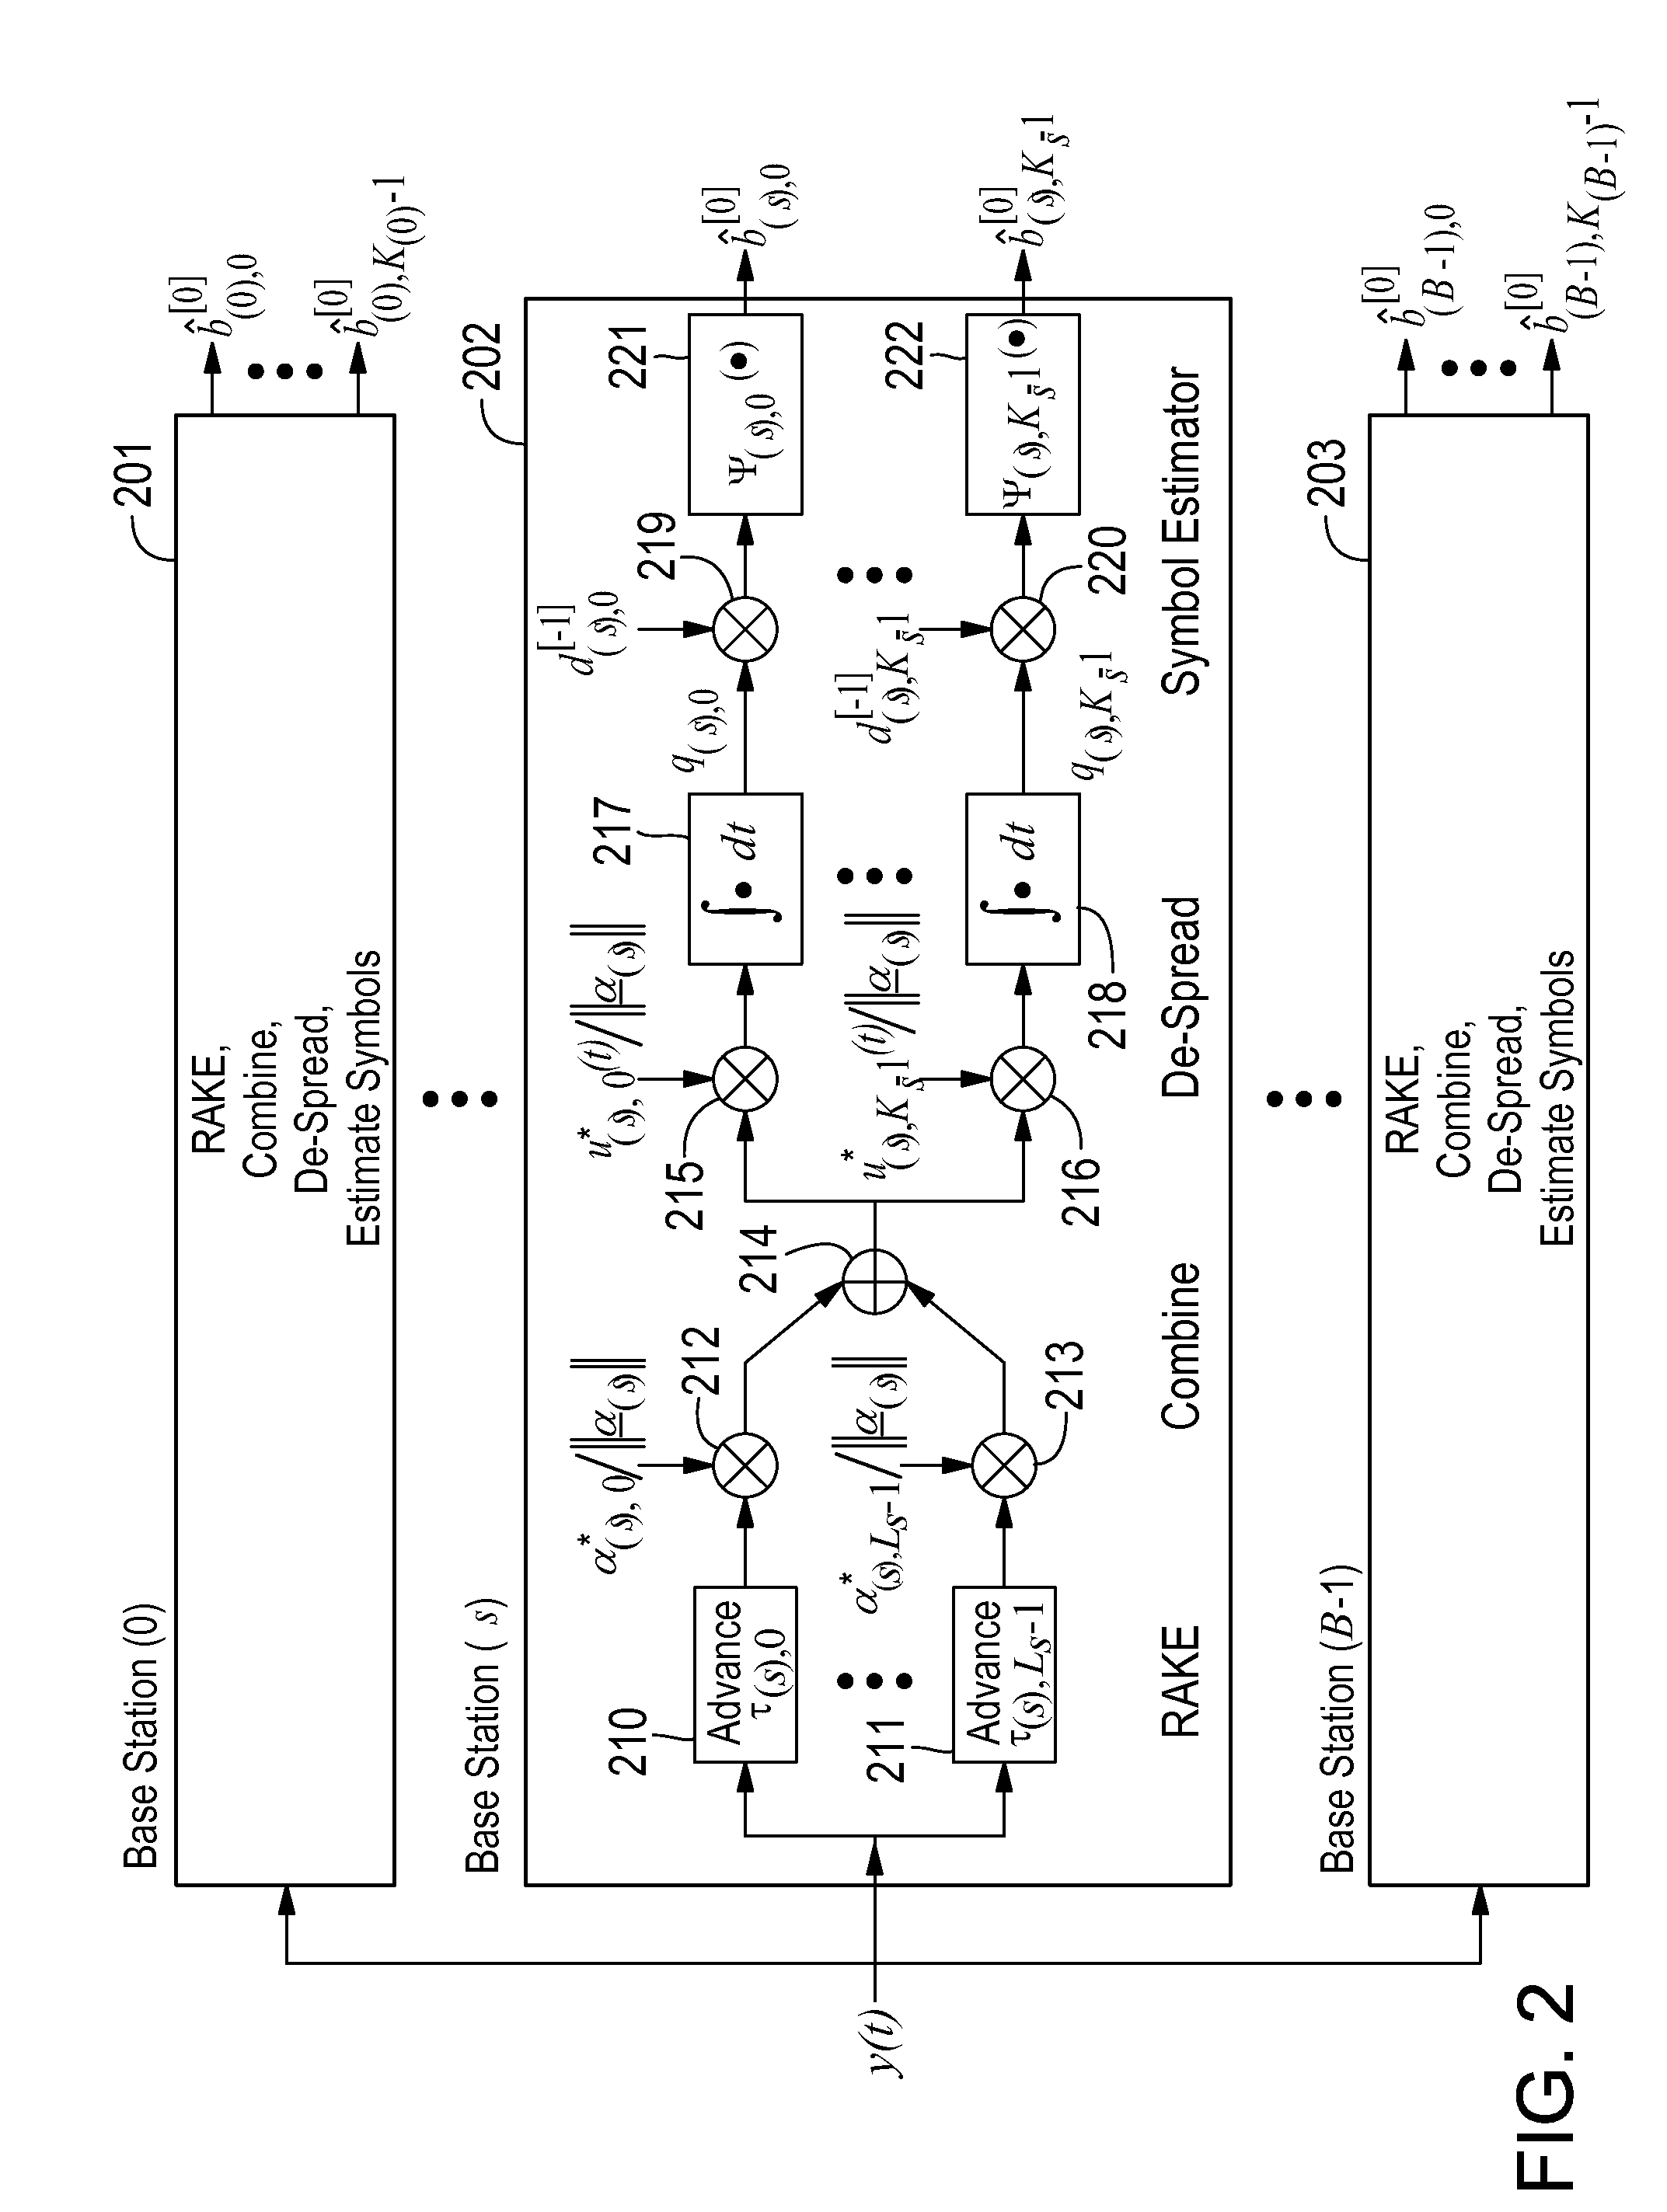 Iterative Interference Cancellation Using Mixed Feedback Weights and Stabilizing Step Sizes